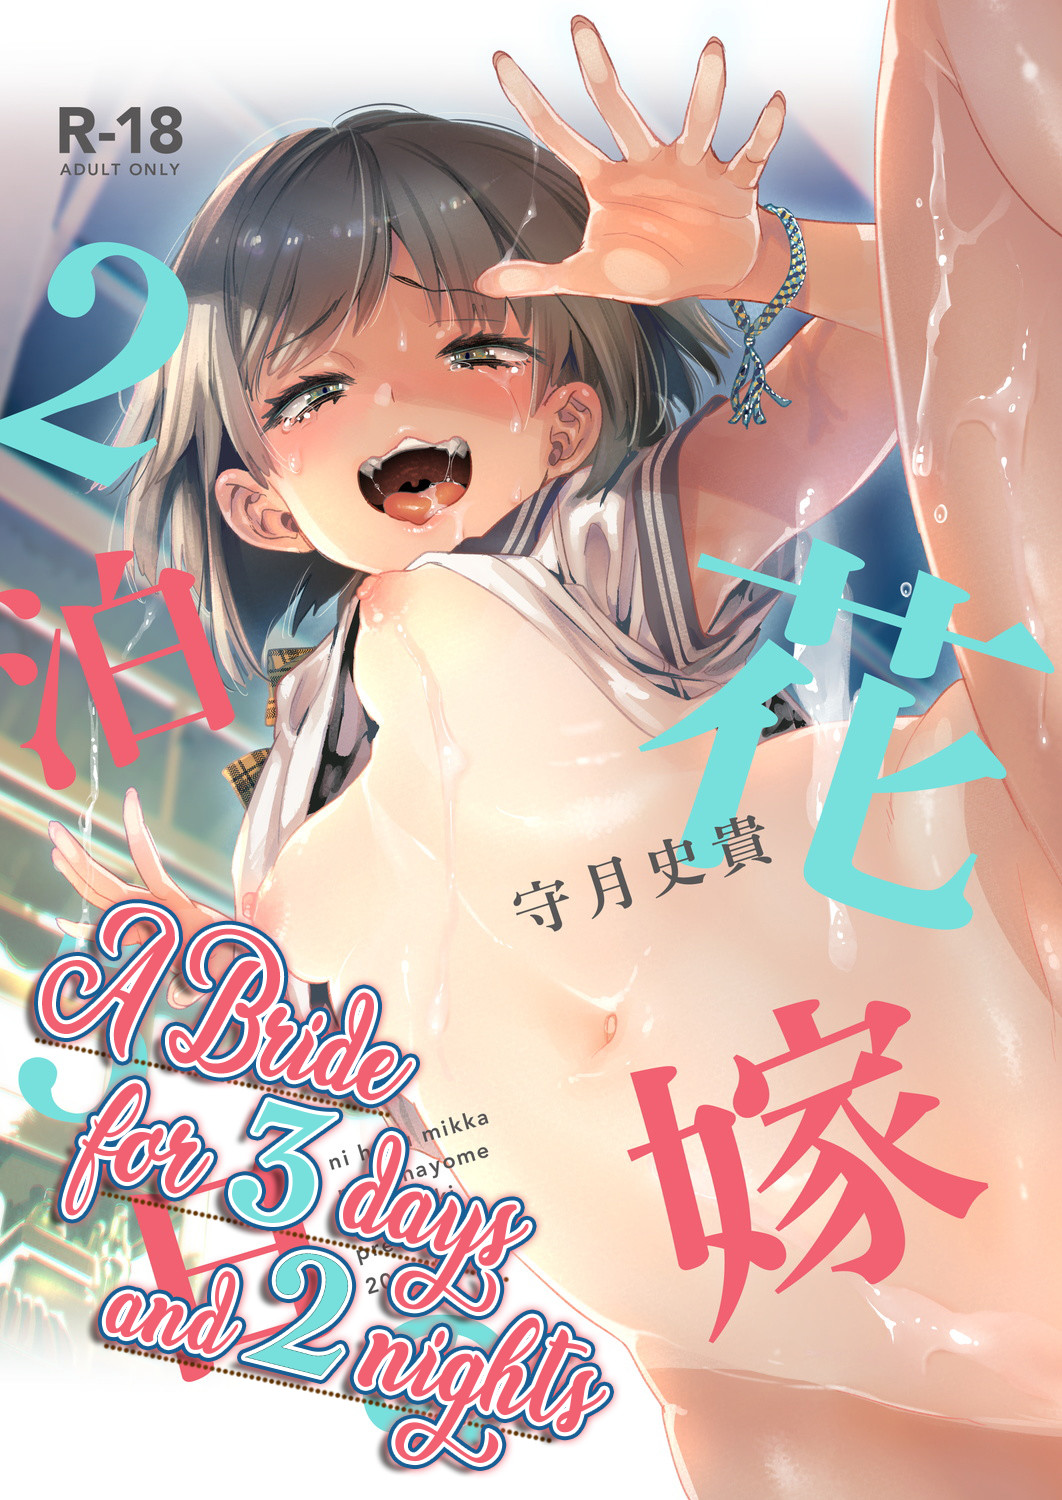 Hentai Manga Comic-A Bride For 3 Days And 2 Nights-Read-1